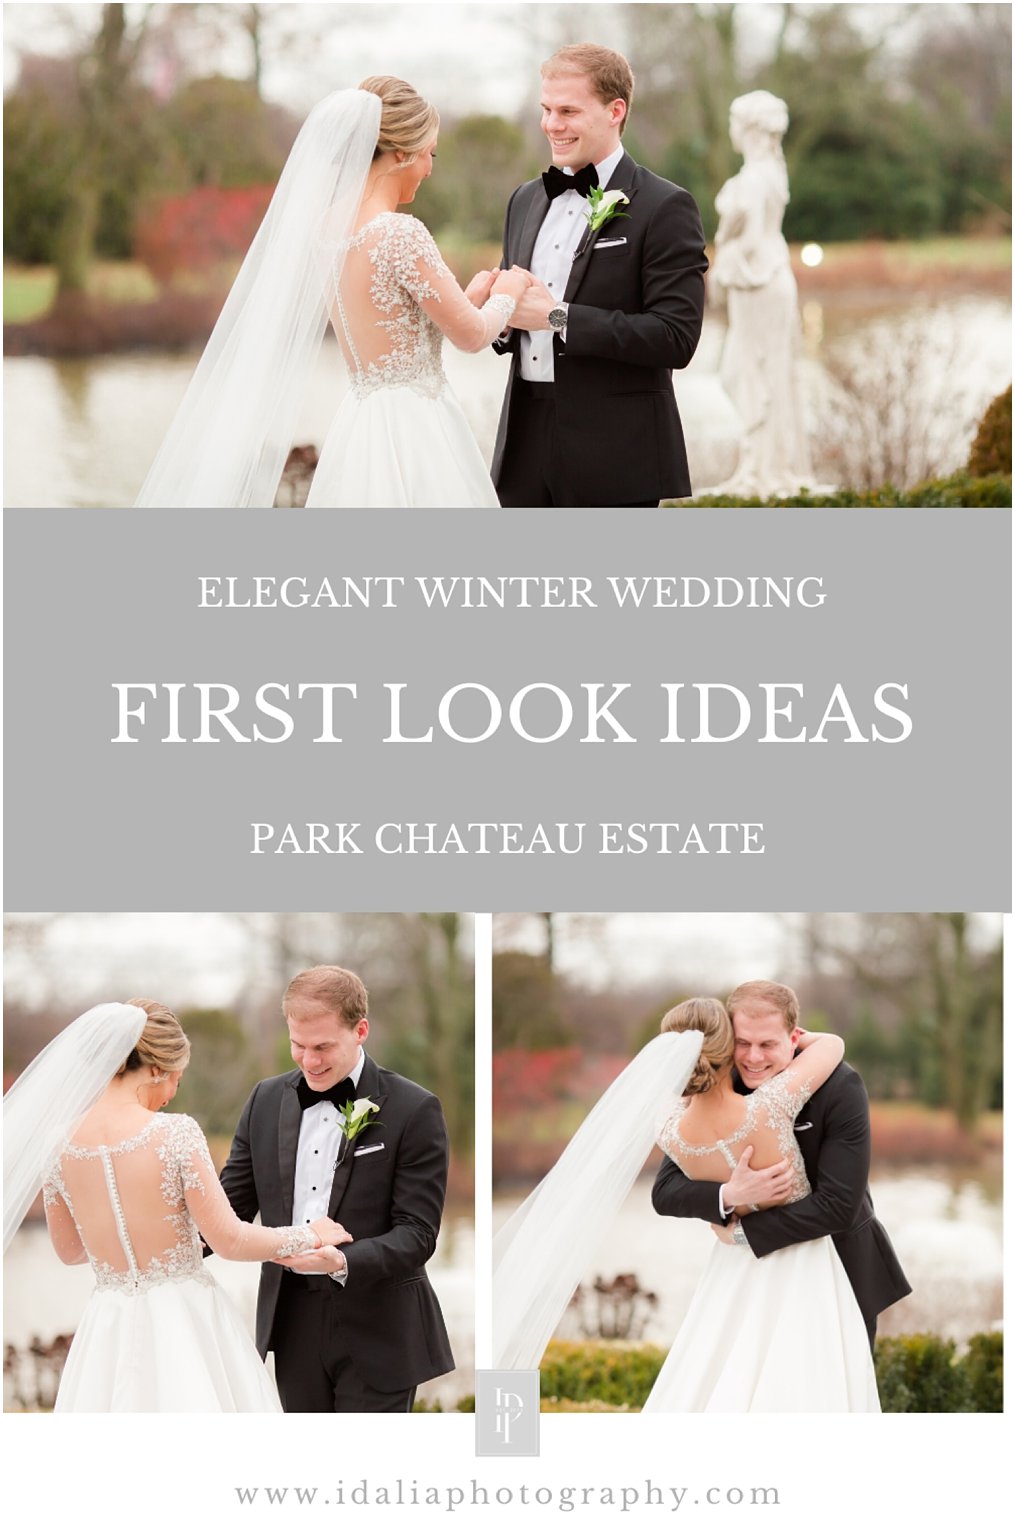 First look ideas for a wedding at Park Chateau Estate and Gardens | Photos by Idalia Photography